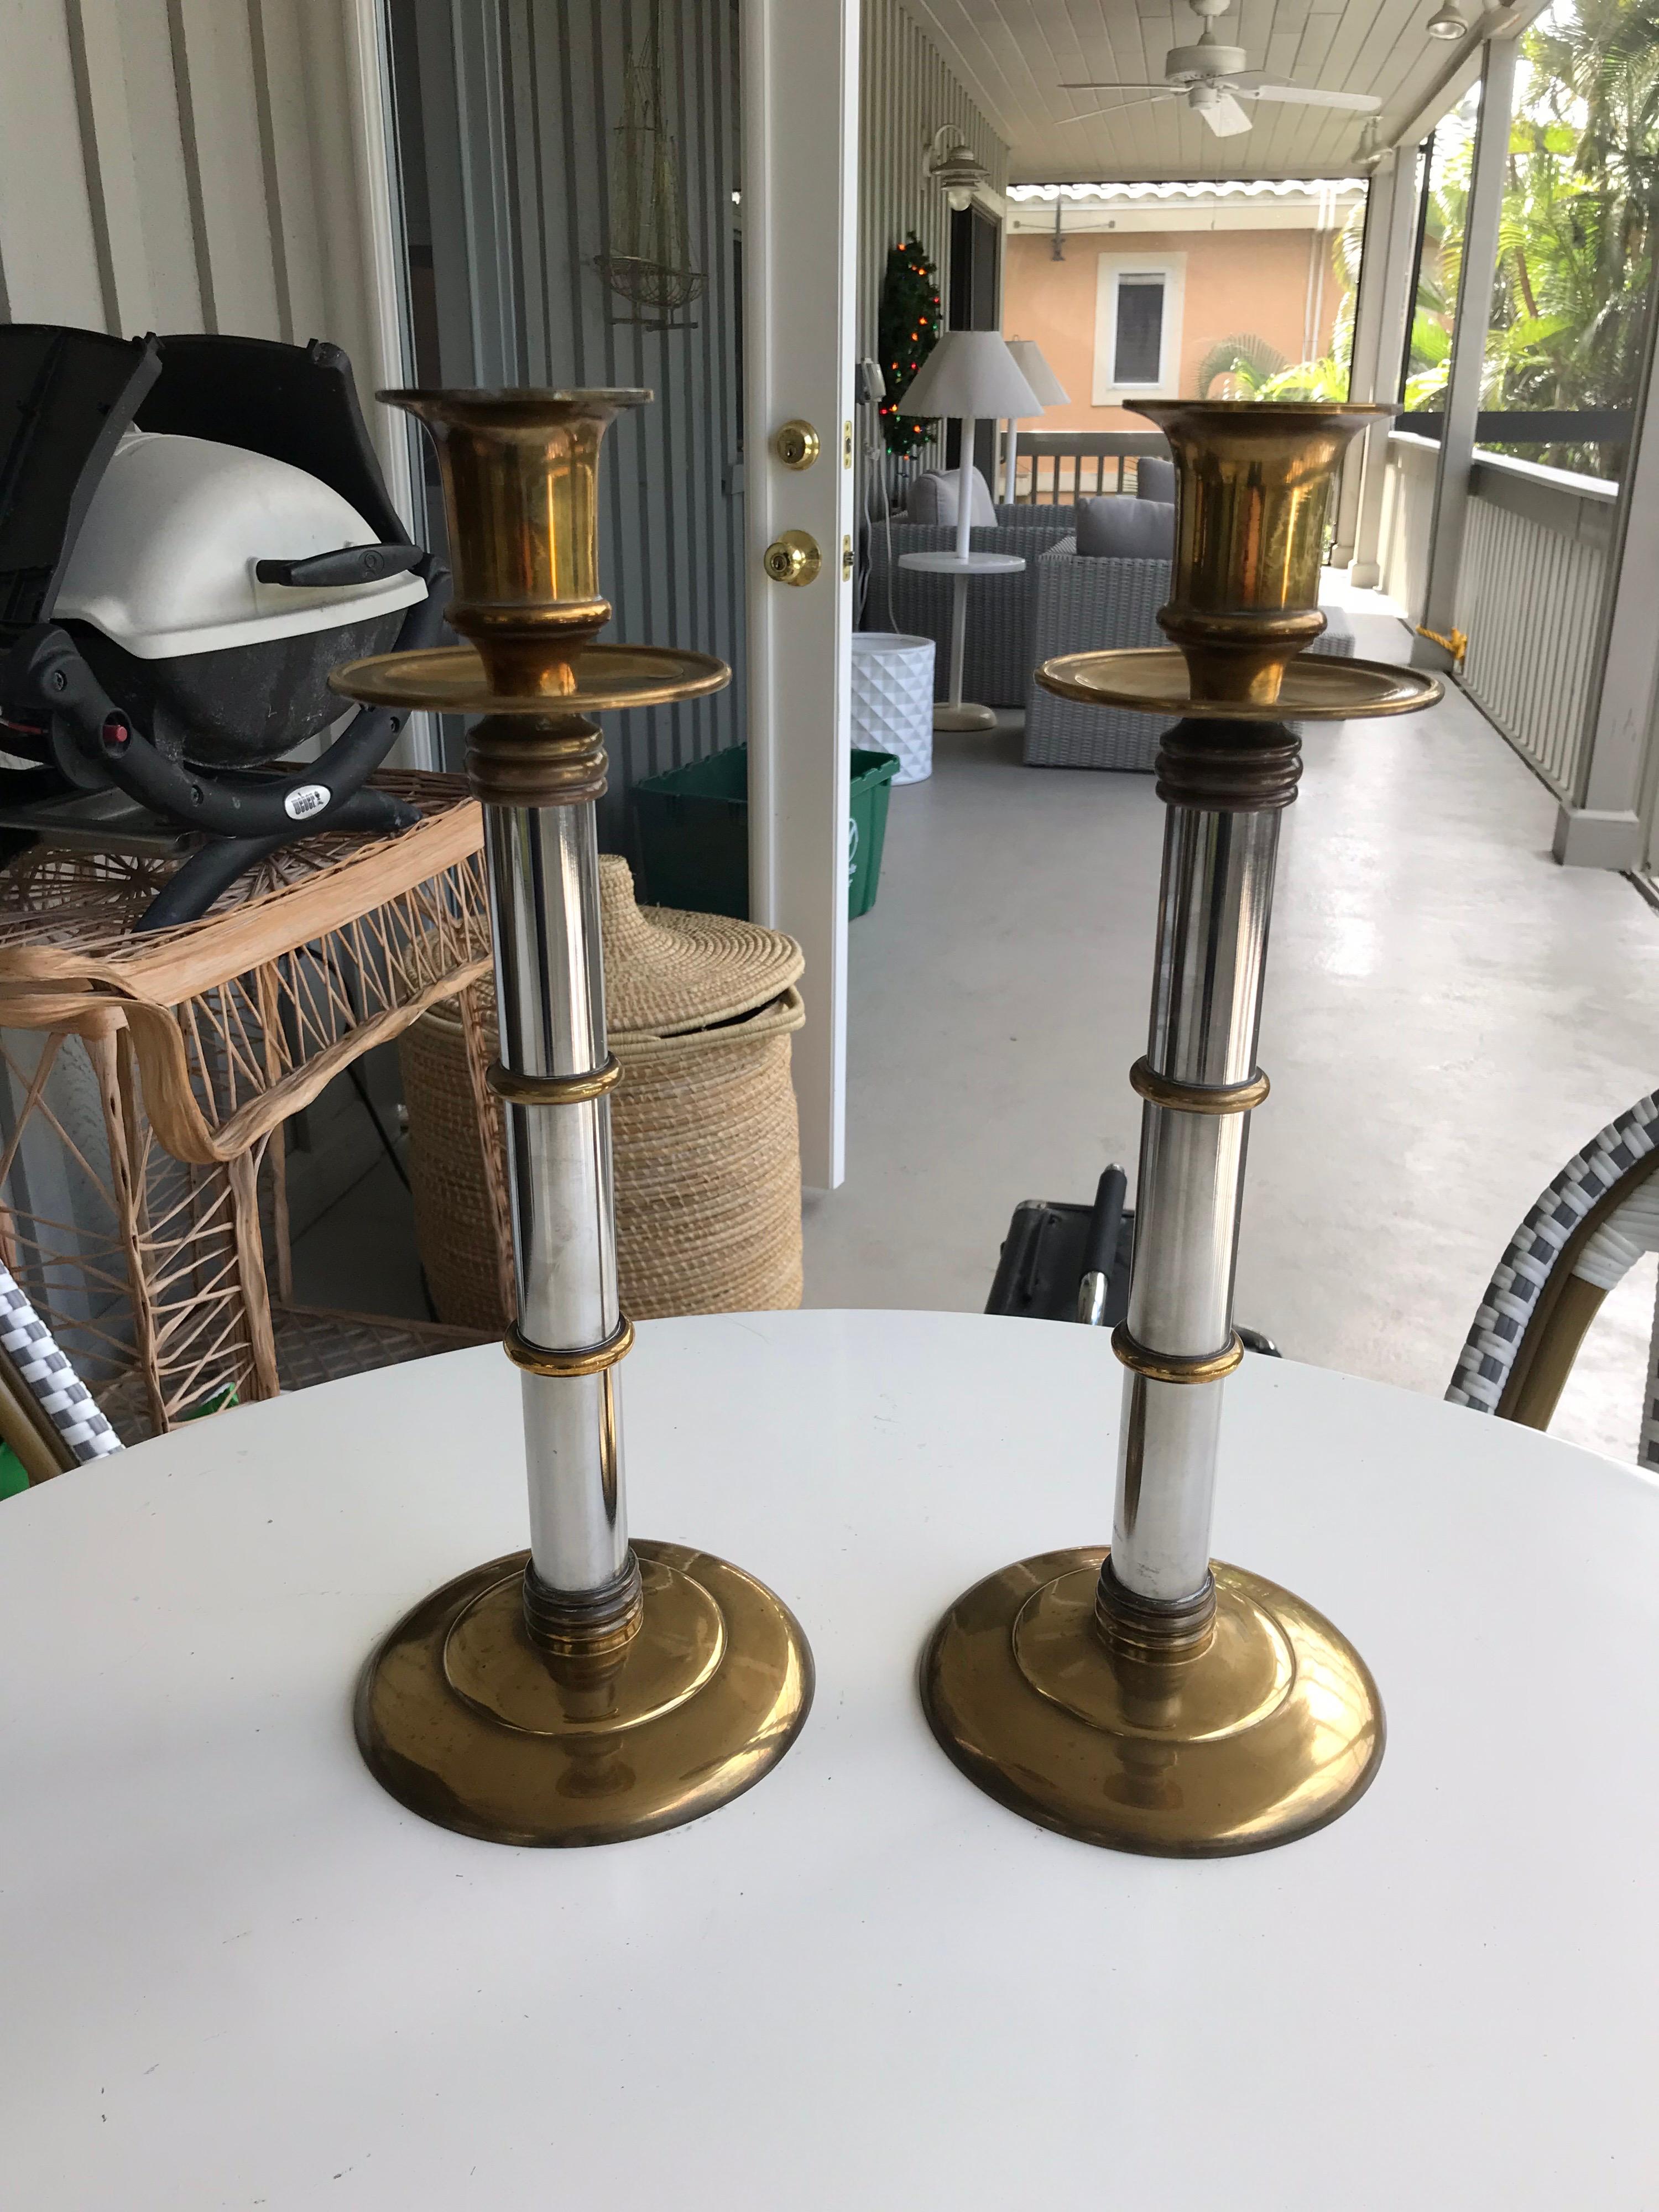 This is a pair of heavy brass and chrome candlesticks by Maitland Smith 
The banding has kind of a bamboo look but would go in most any decor.